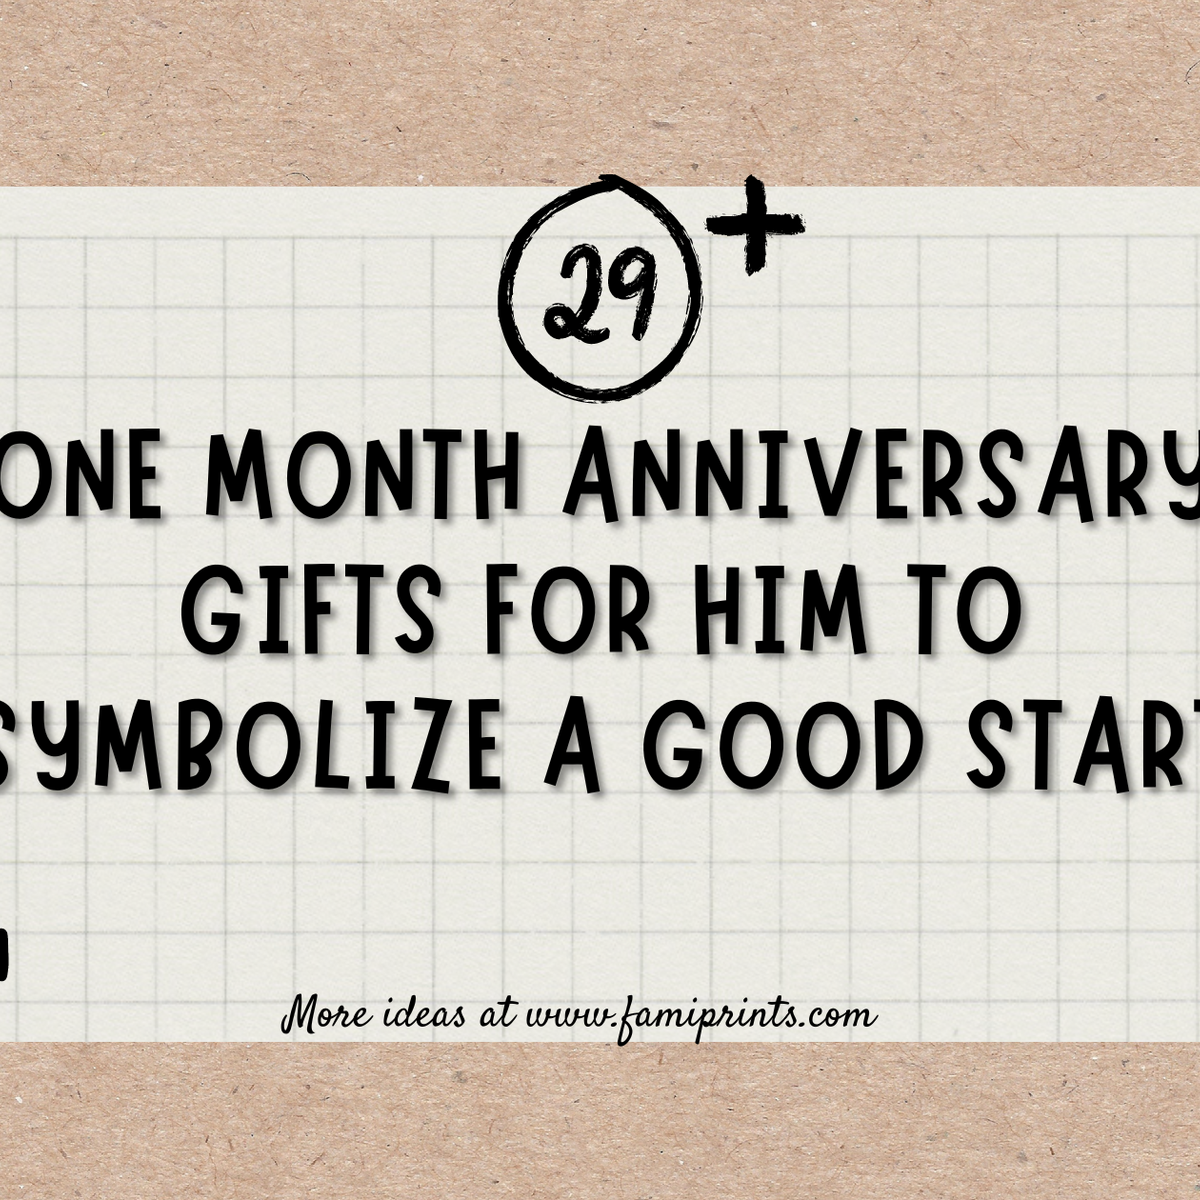 26 Amazing Gifts to Celebrate Your 1 Month Anniversary - 365Canvas Blog